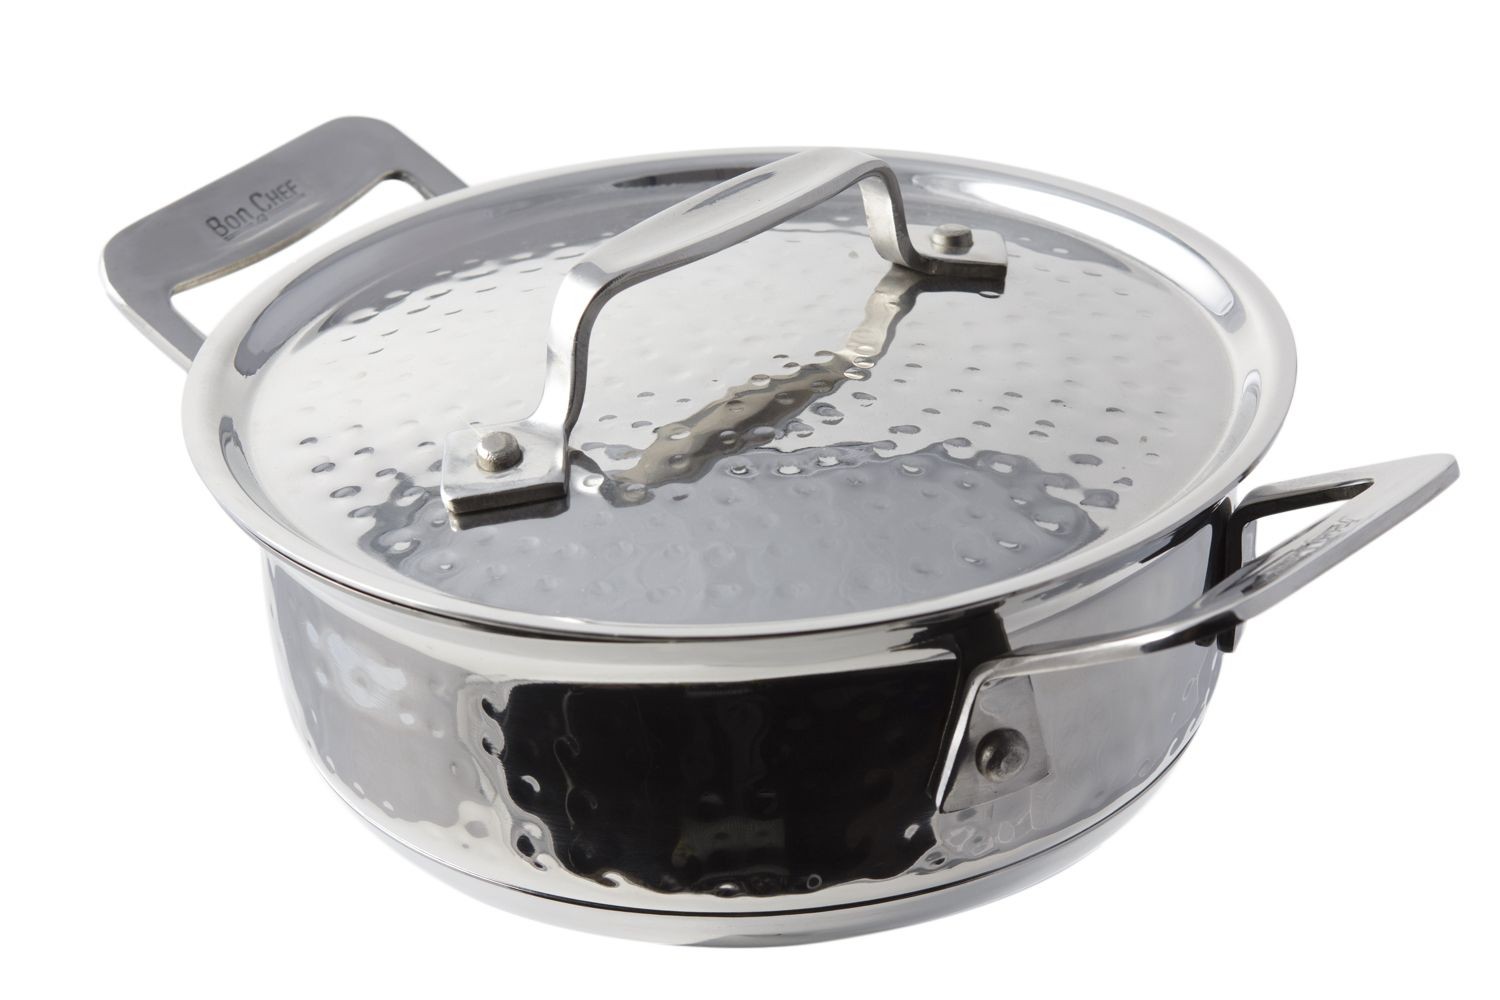 Bon Chef 60027HF Cucina Stainless Steel Round Dish with Lid, Hammered Finish, 36 oz.